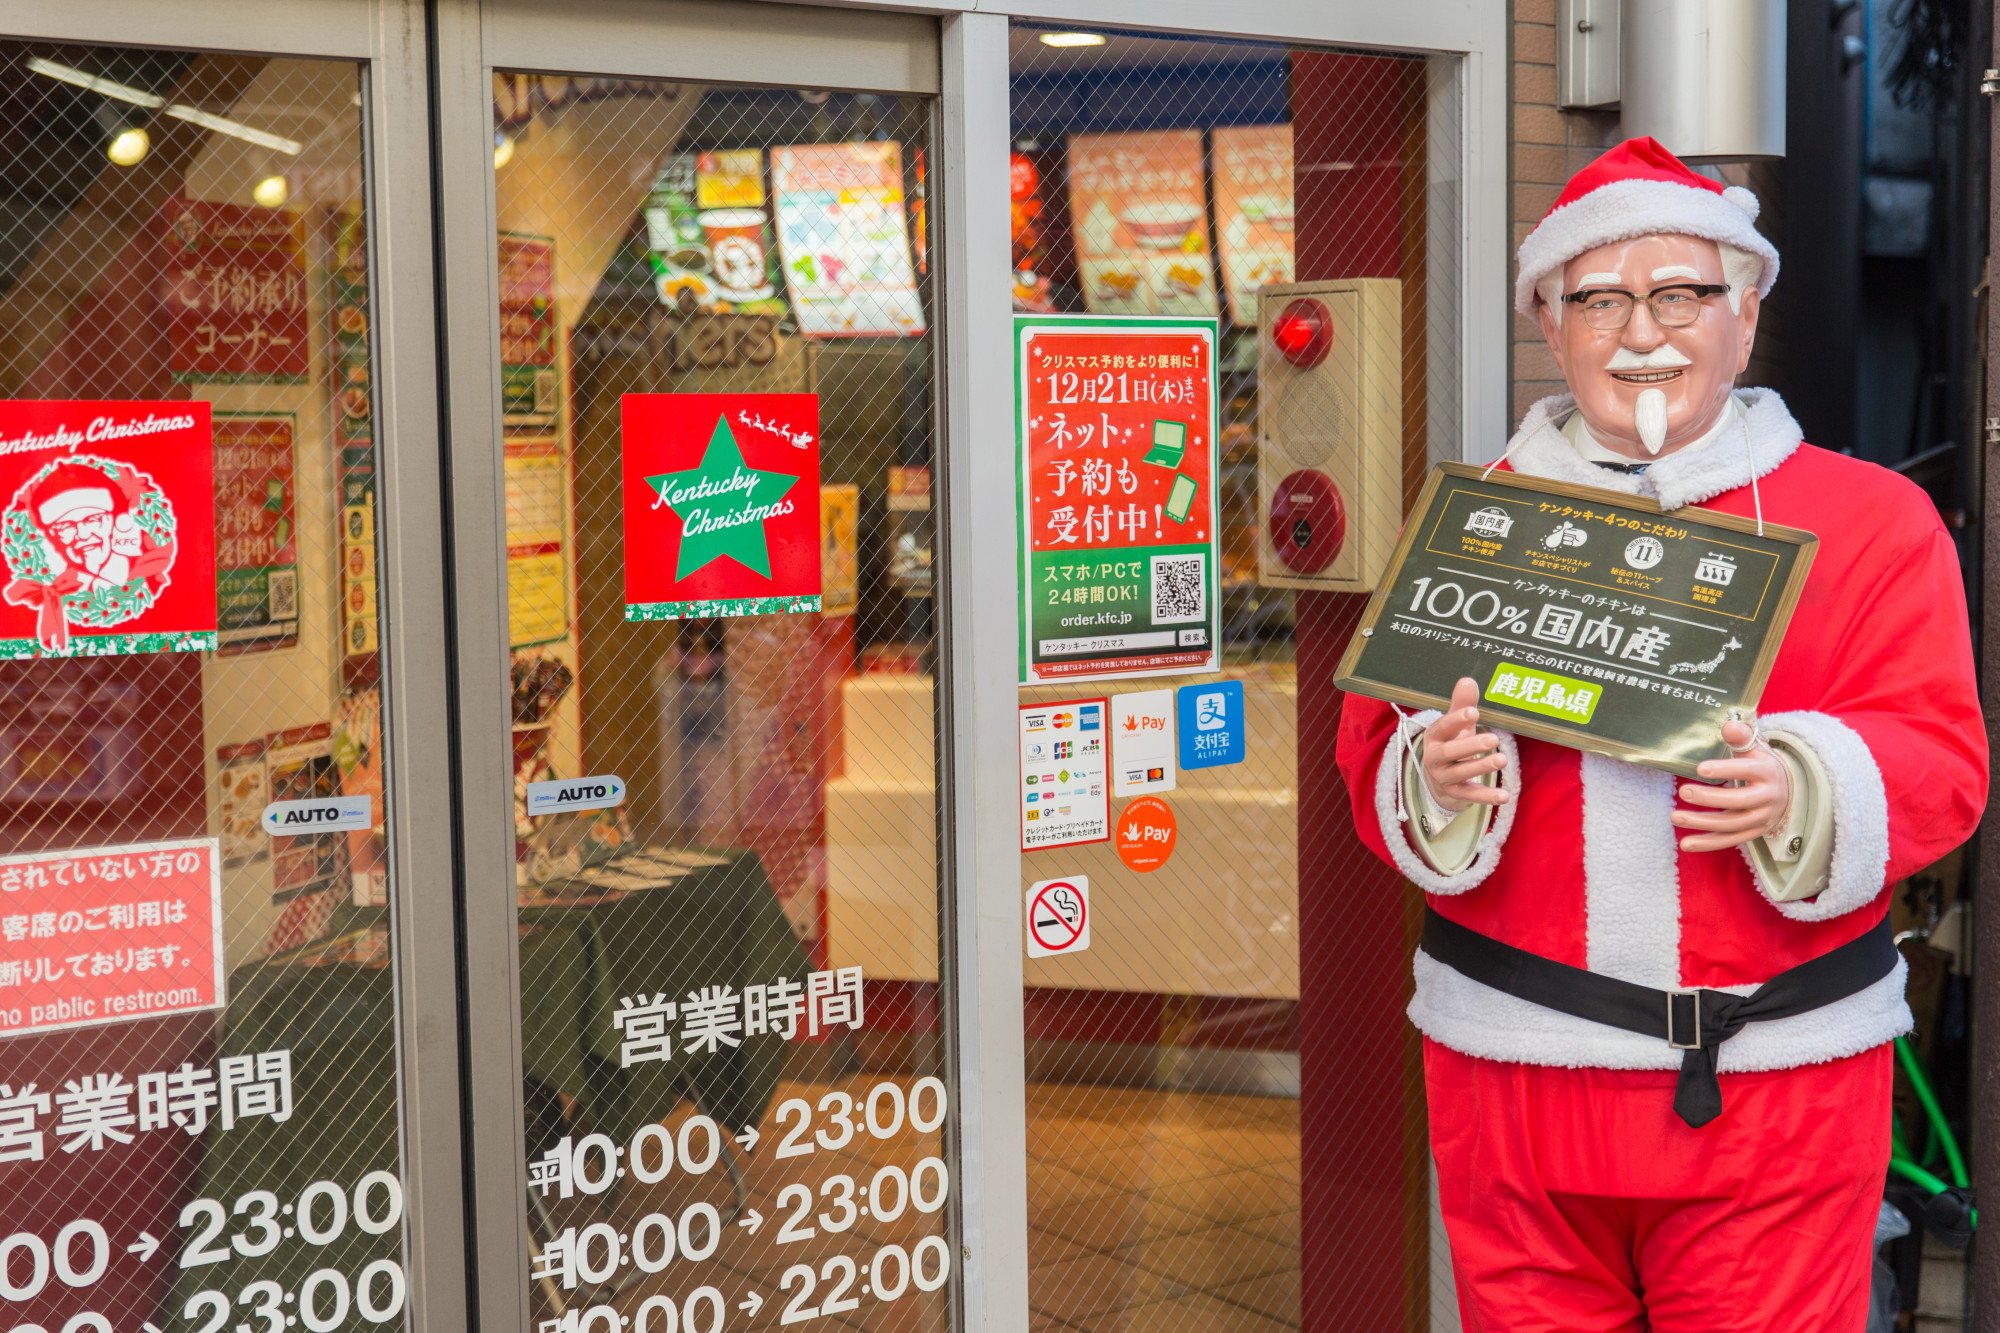 A statue of KFC founder Colonel Sanders dressed up for Christmas in front of one of the fast food chain’s outlets in Japan. Photo: Shutterstock